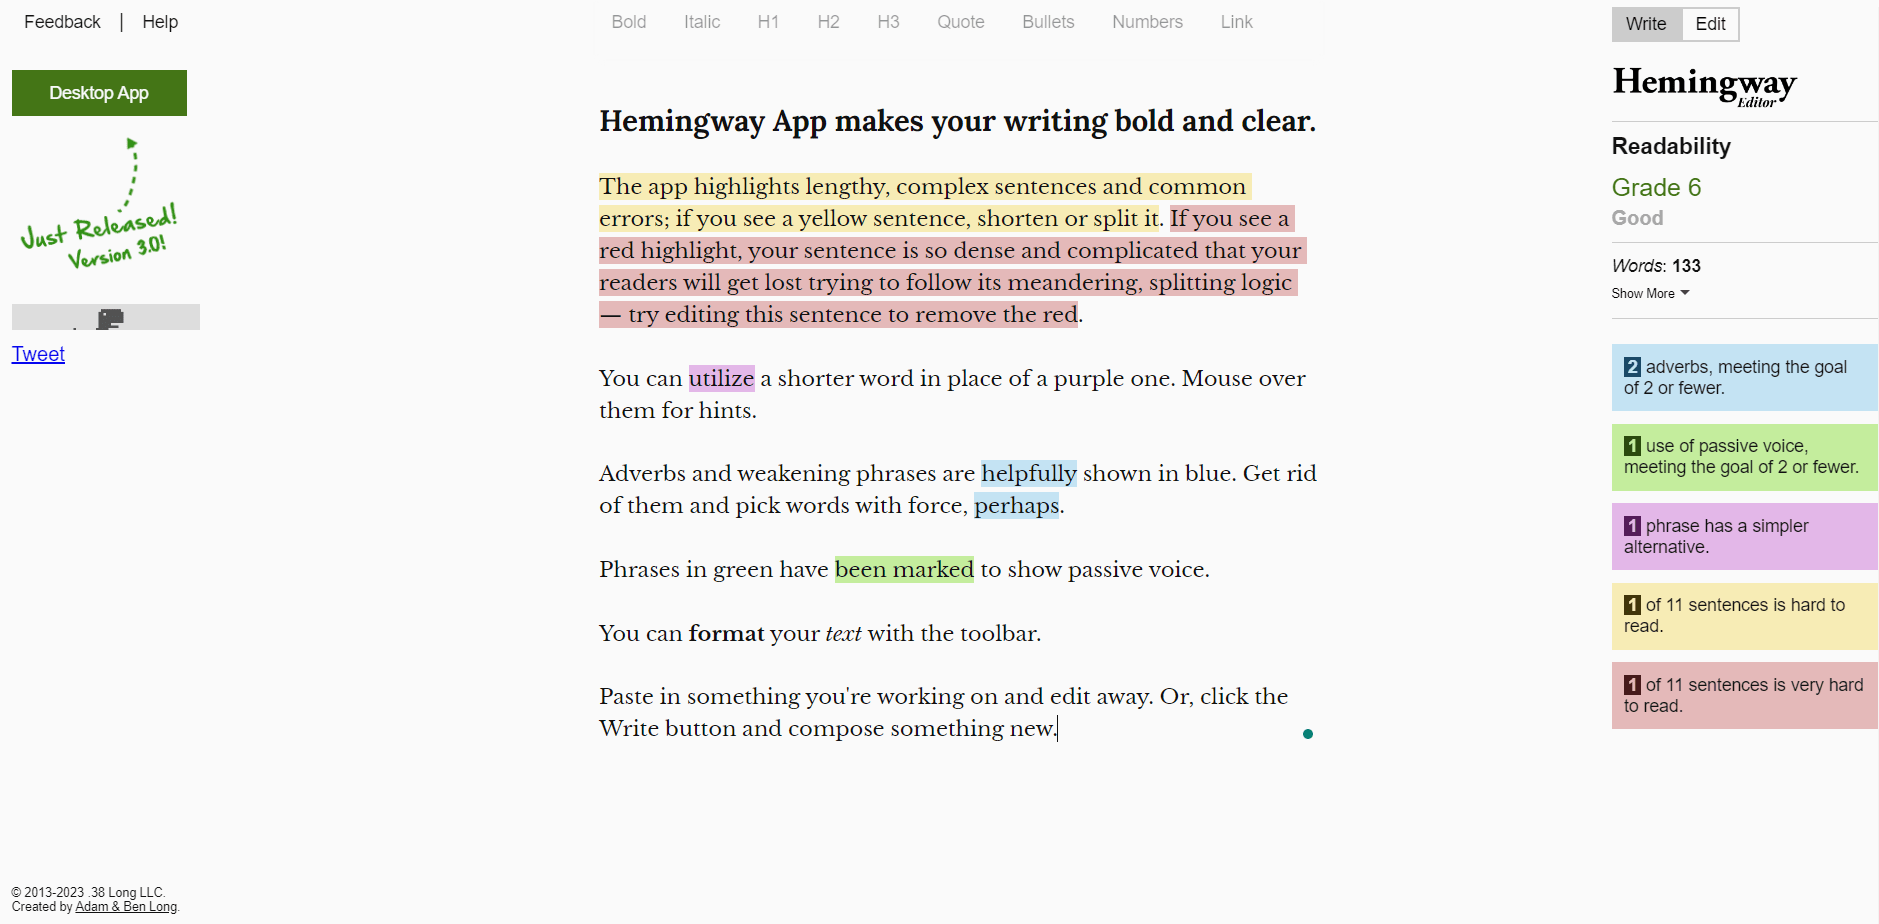 Hemingway editor for content readability